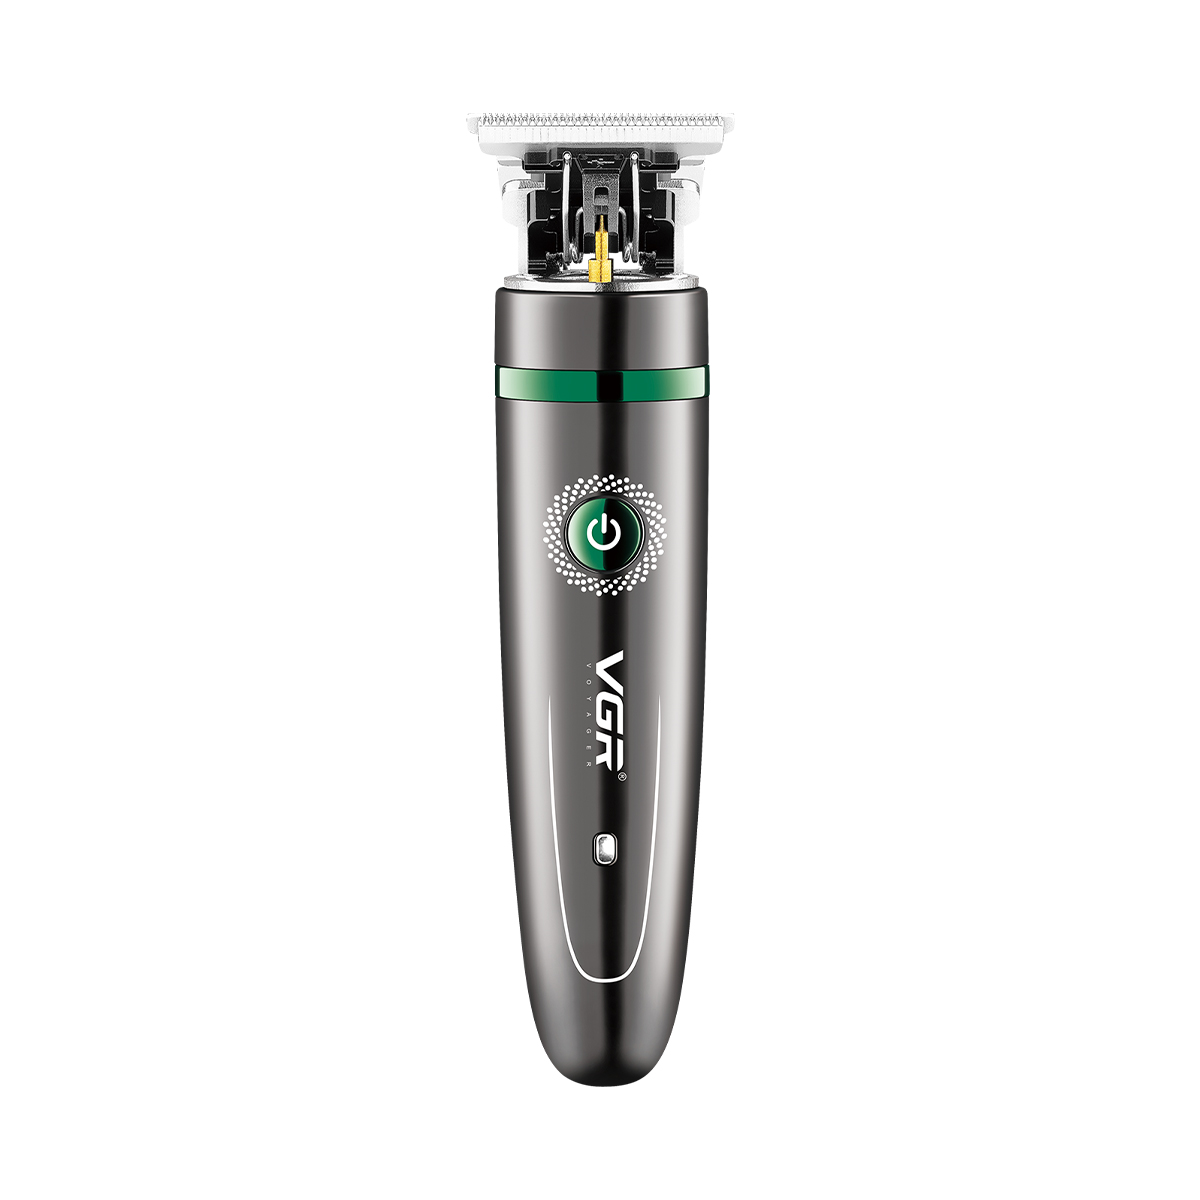 China Barber Clippers Suppliers, China Hair Clipper Factory, China Hair Clipper Supplier, China Electric Mini Shaver, Cordless Electric Man Shaver Factory, Custom Portable Hair Trimmer, Custom Professional Hair Clipper Trimmer, Hair Trimmer Made In China, Hair Trimmer Manufacturer, Hair Trimmer Set Factory, Hair Trimmer Supplier